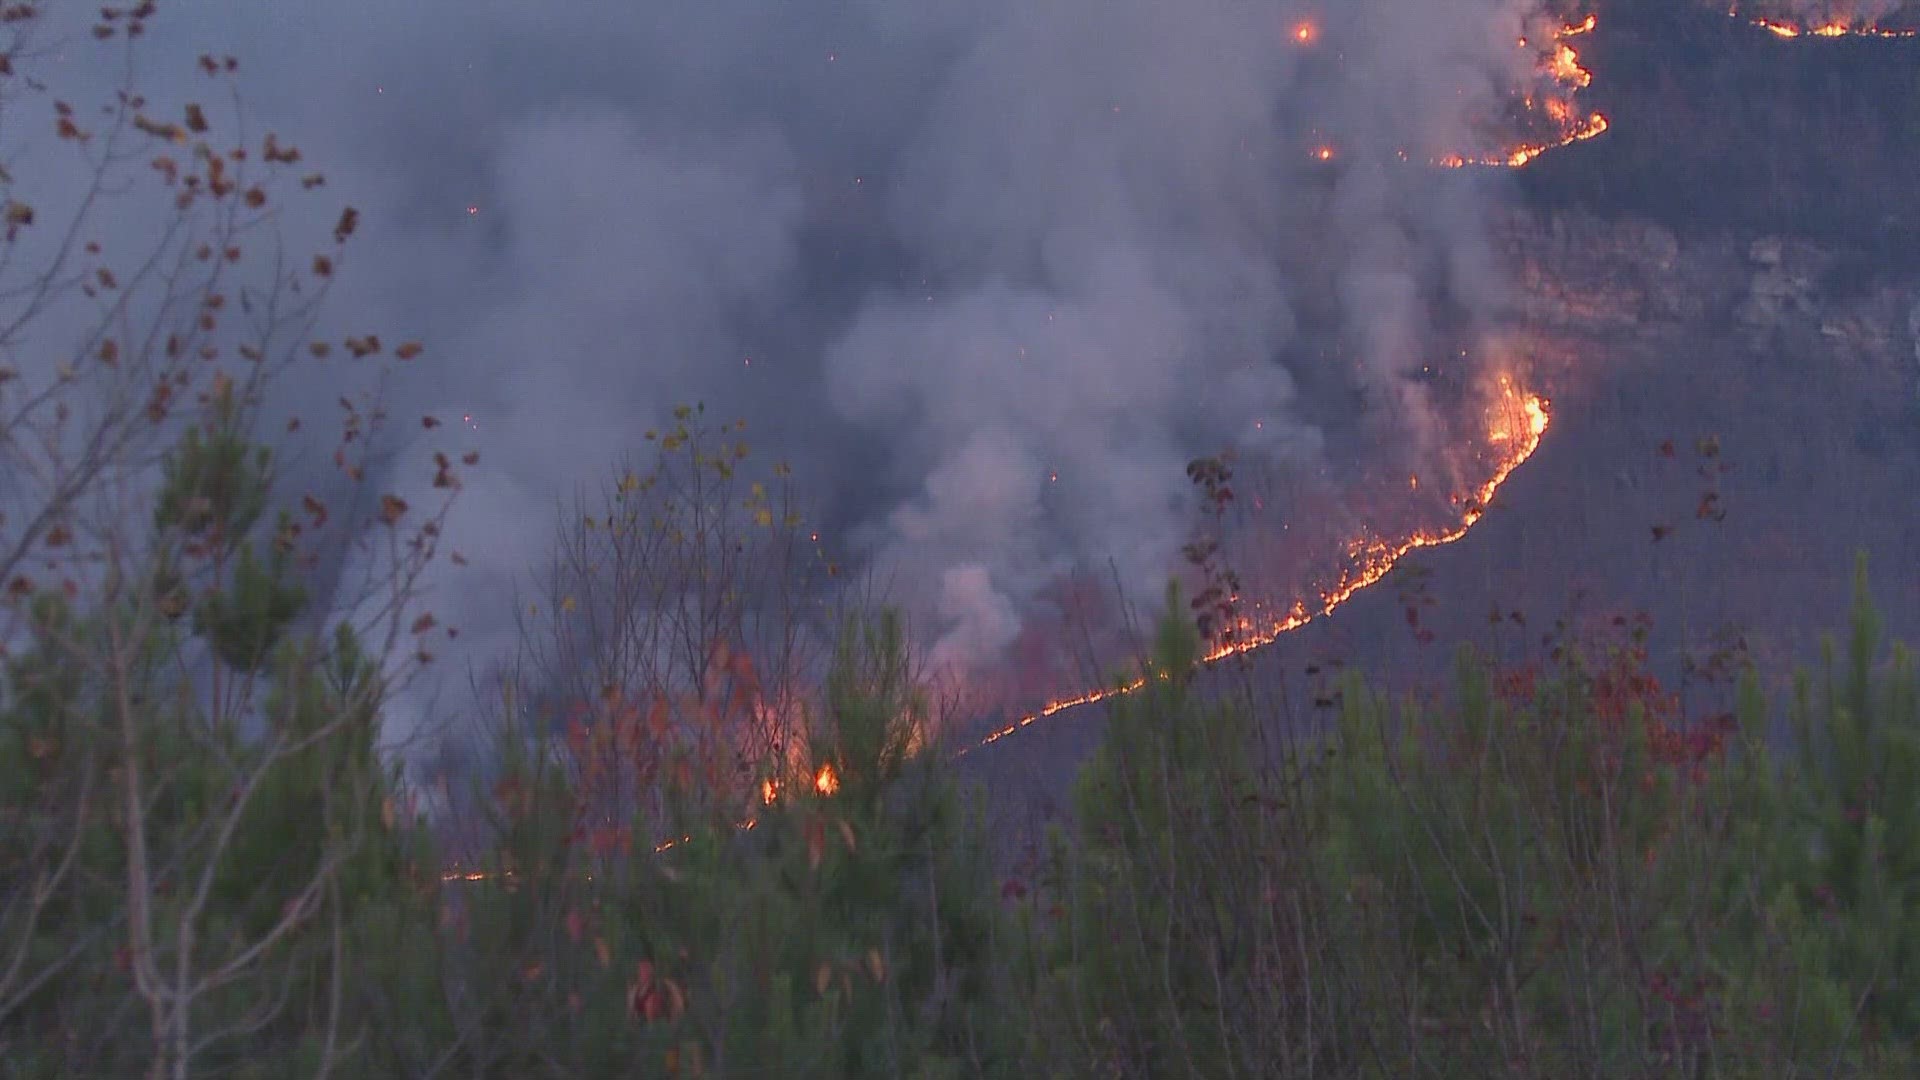 Over 150 firefighters are working to stop its spread. Crews have come from across the country to help